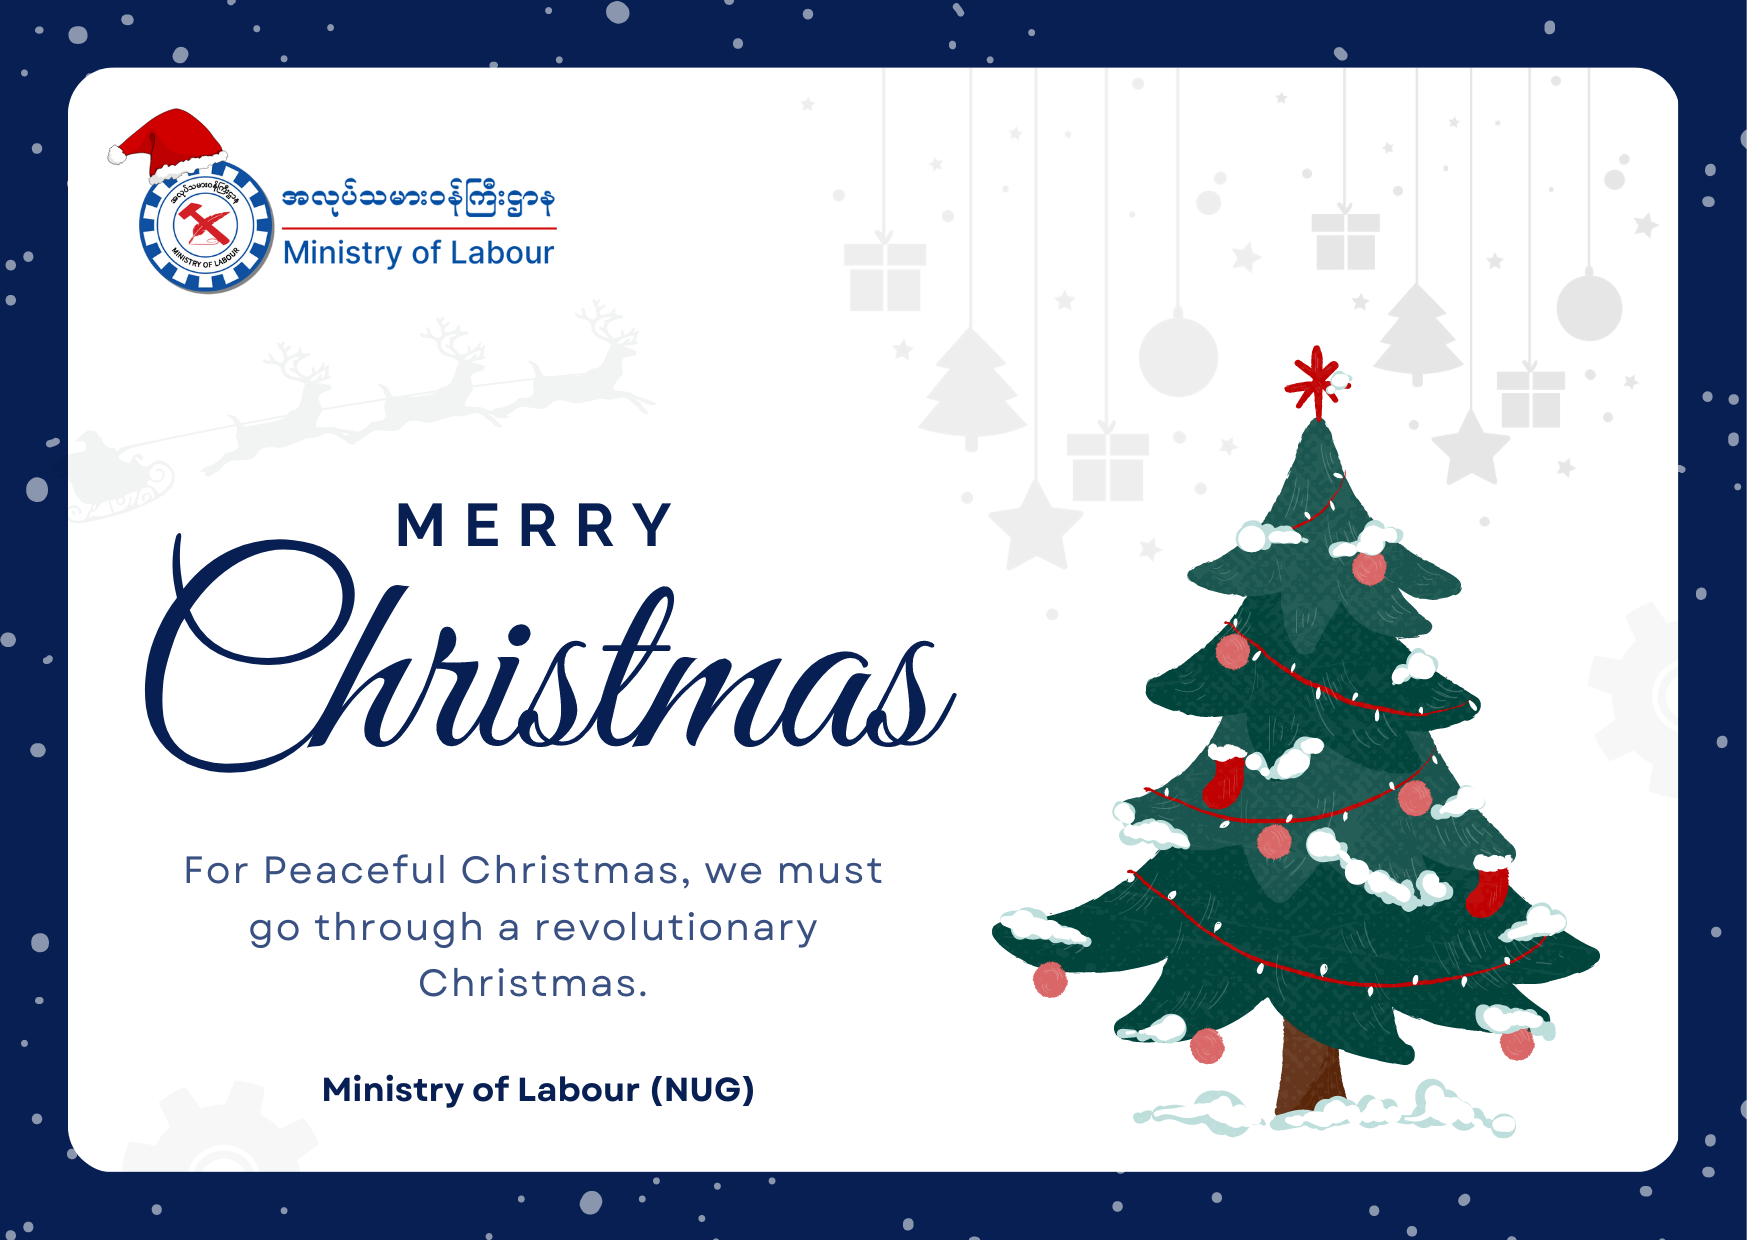 Ministry of Labour https://mol.nugmyanmar.org/news/merry-christmas-2022/